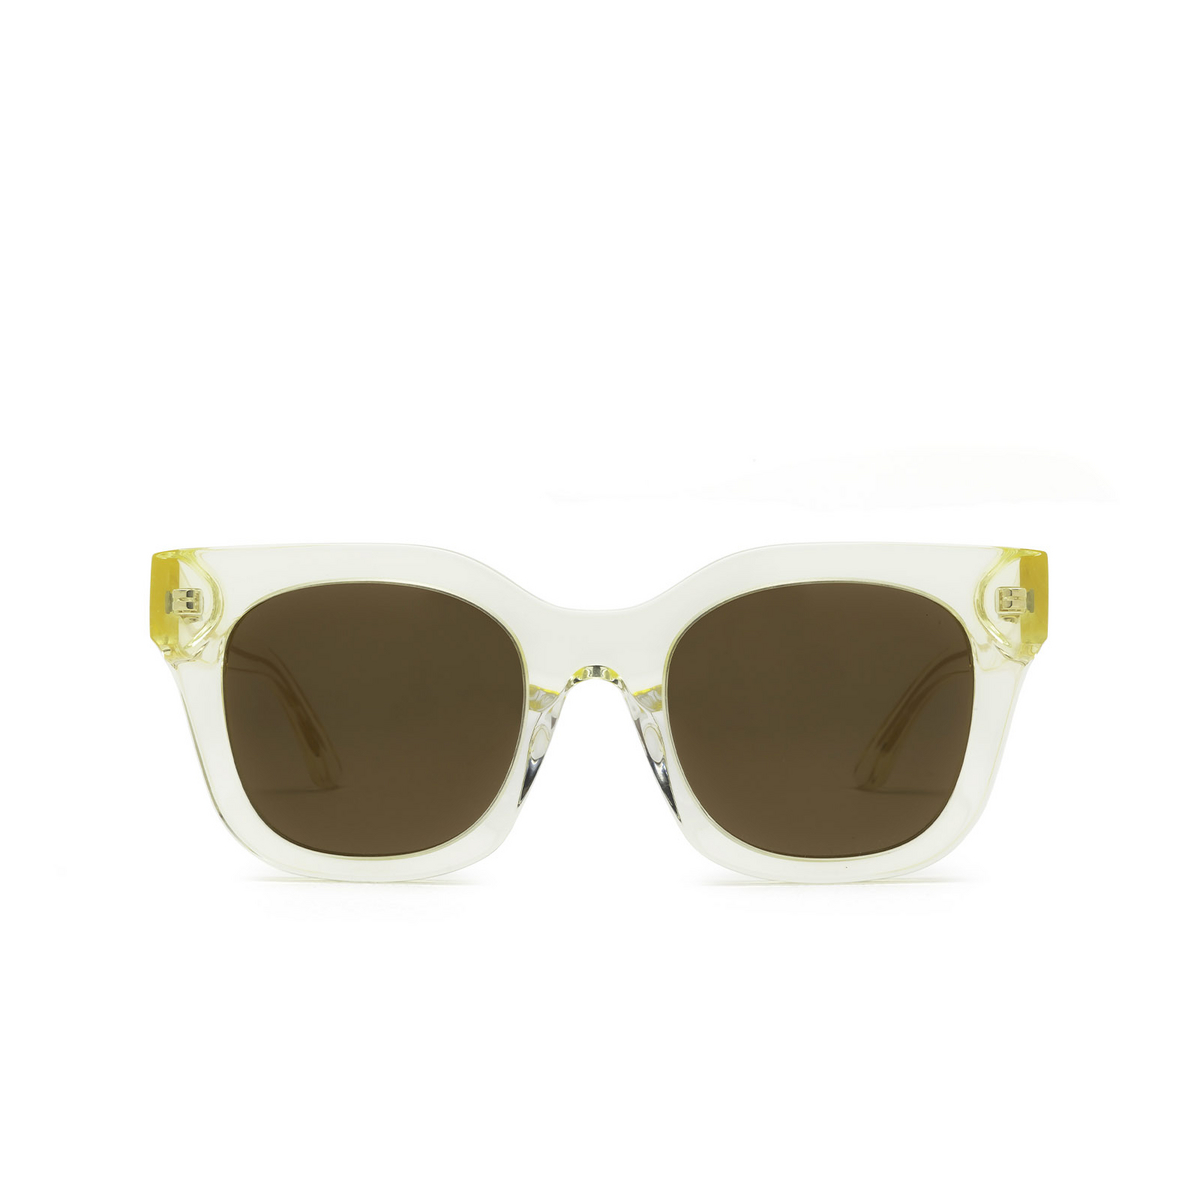 Huma BLUE Sunglasses 02 Champagne - front view